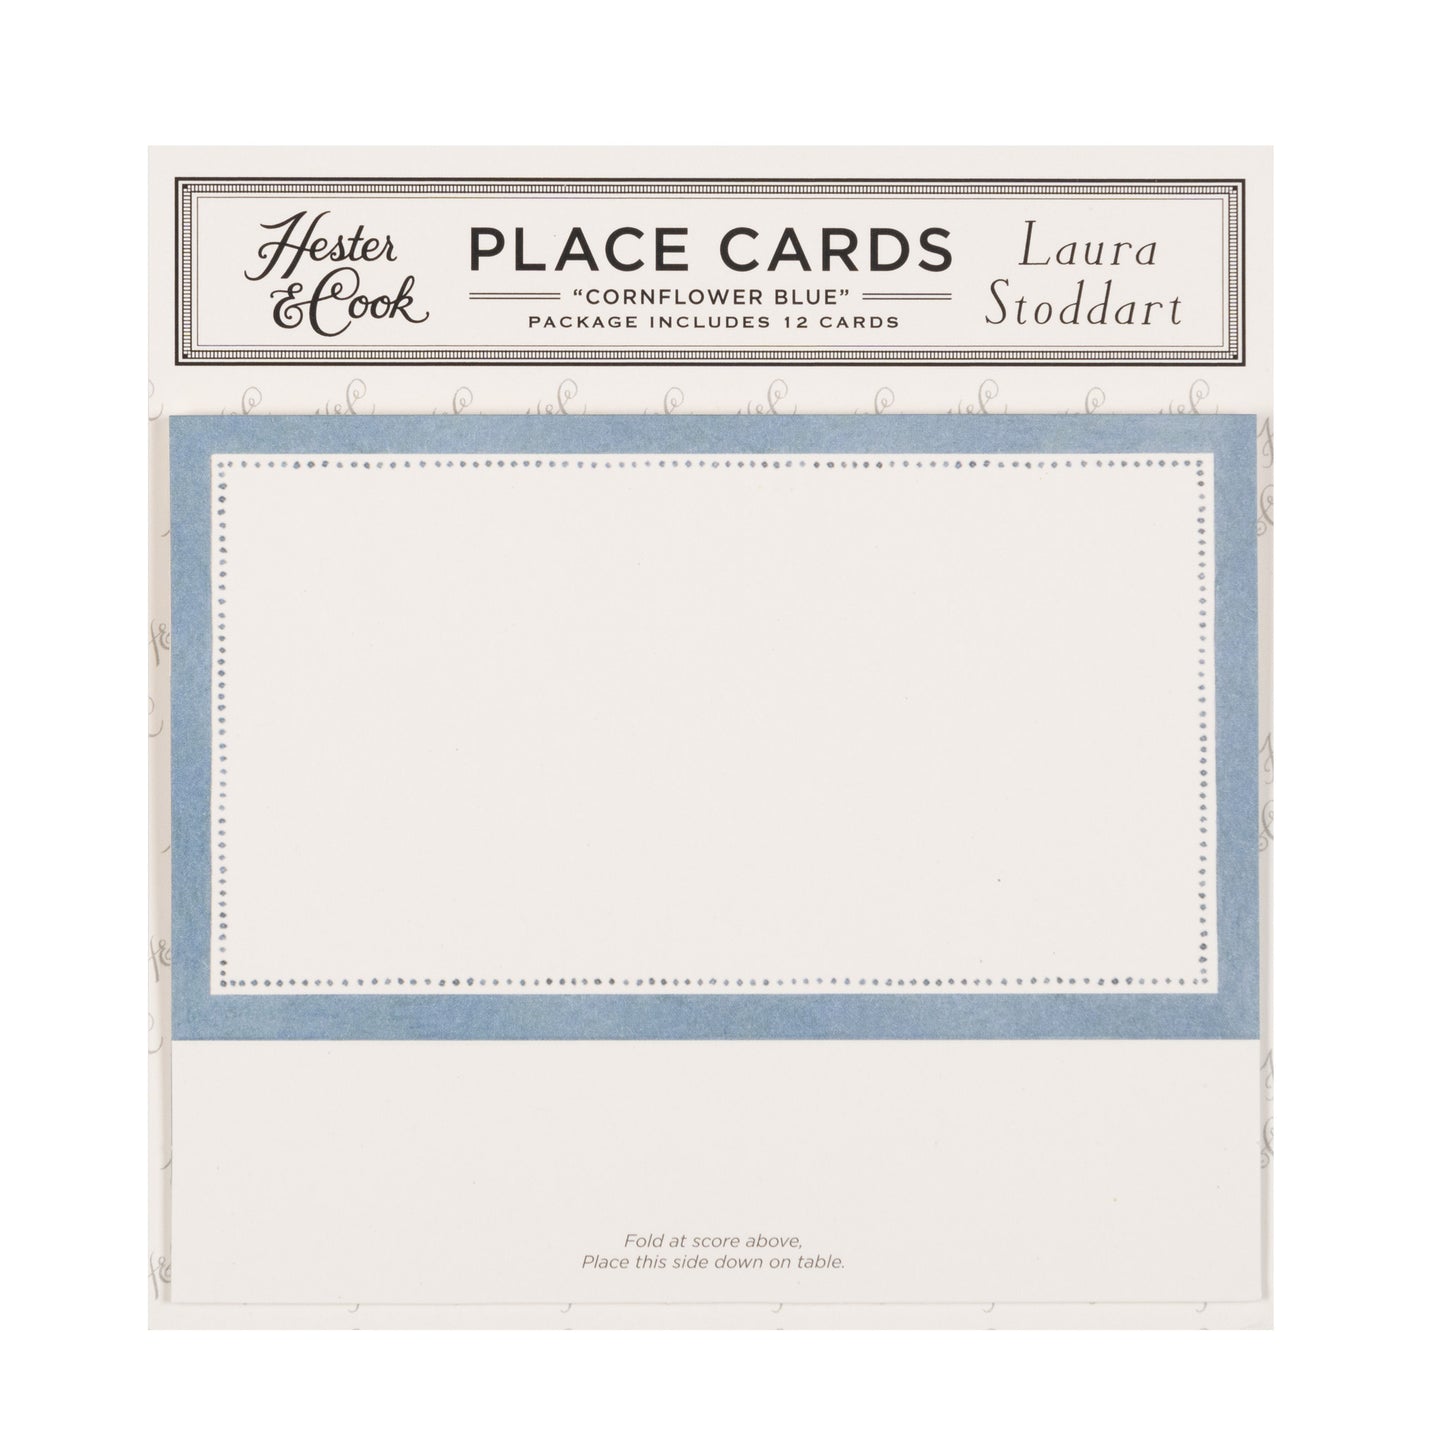 Tulips - blue border place cards